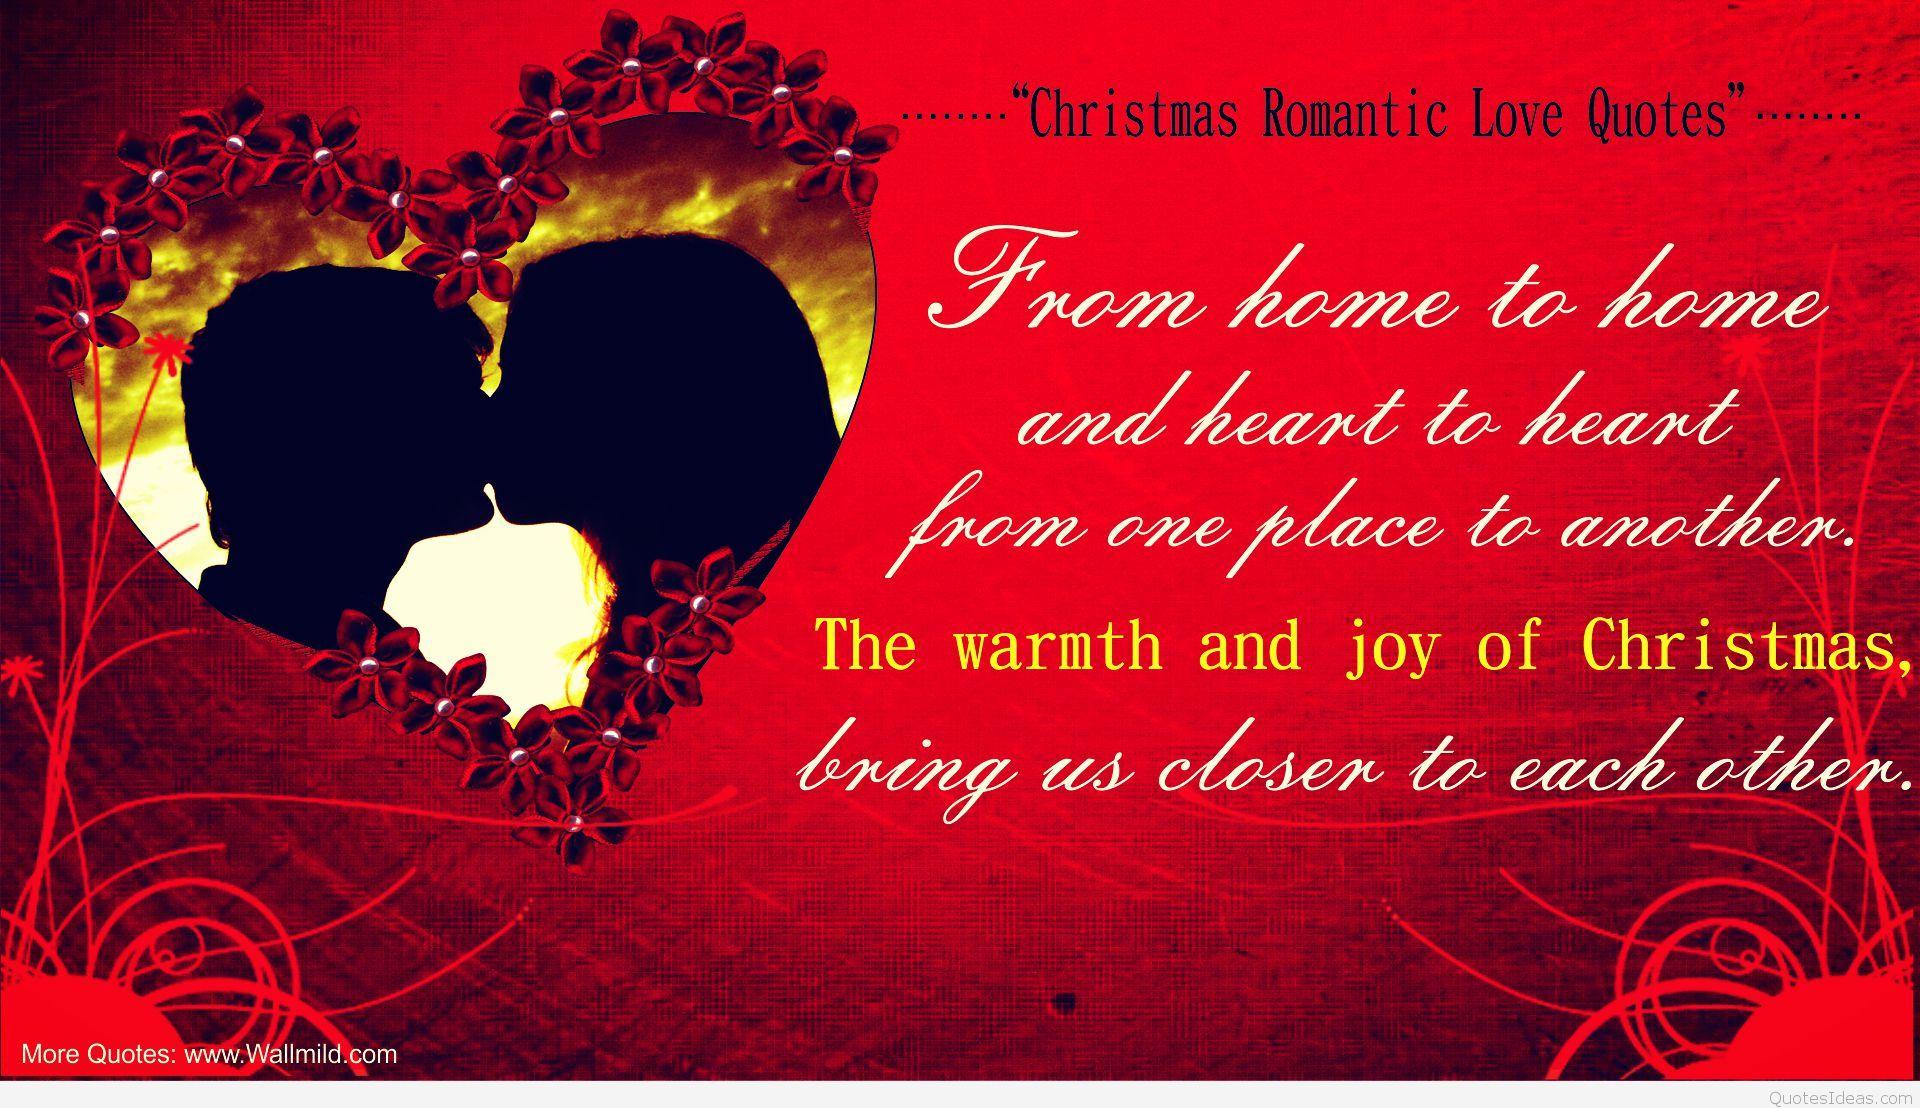 Merry Christmas Love quote romantic HD wallpaper